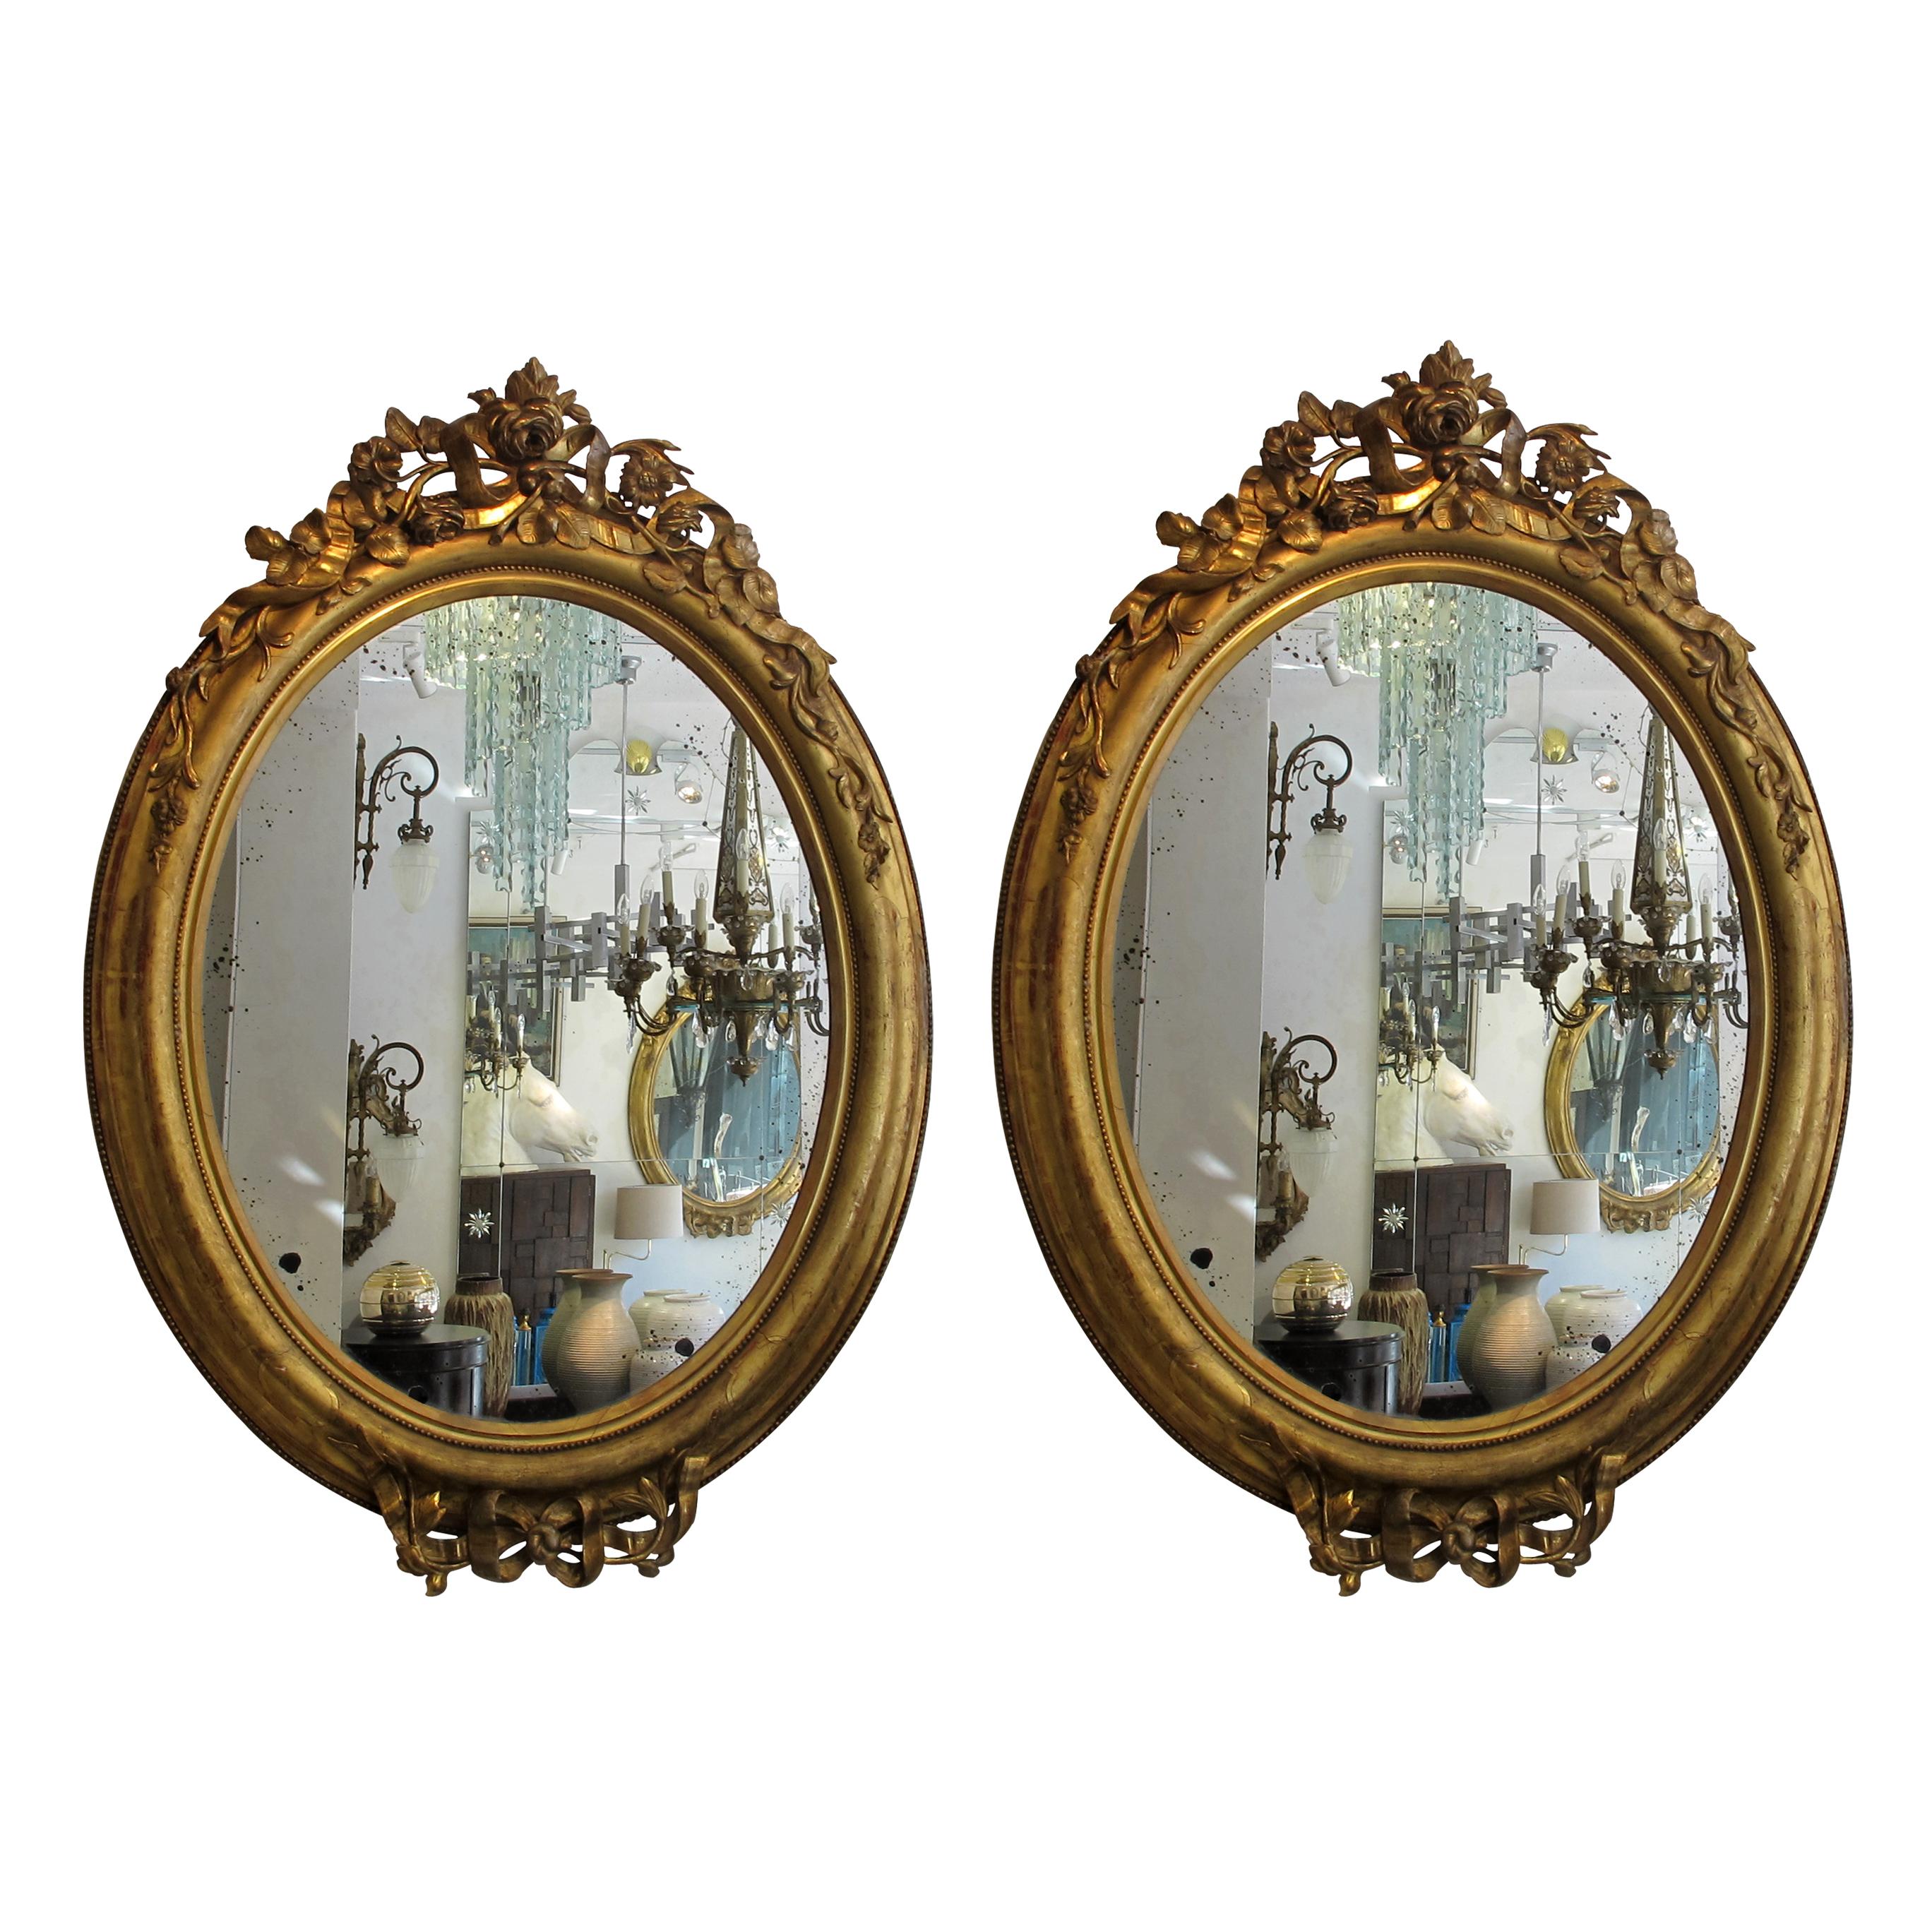 A pair of large French Napoleon lll oval mirrors with giltwood frames and original glass, circa 1860.
The crest holds elaborated carved wood roses and ribbons, the bottom of the oval holds a very elegant ribbon tie with a flower bud. The frame is